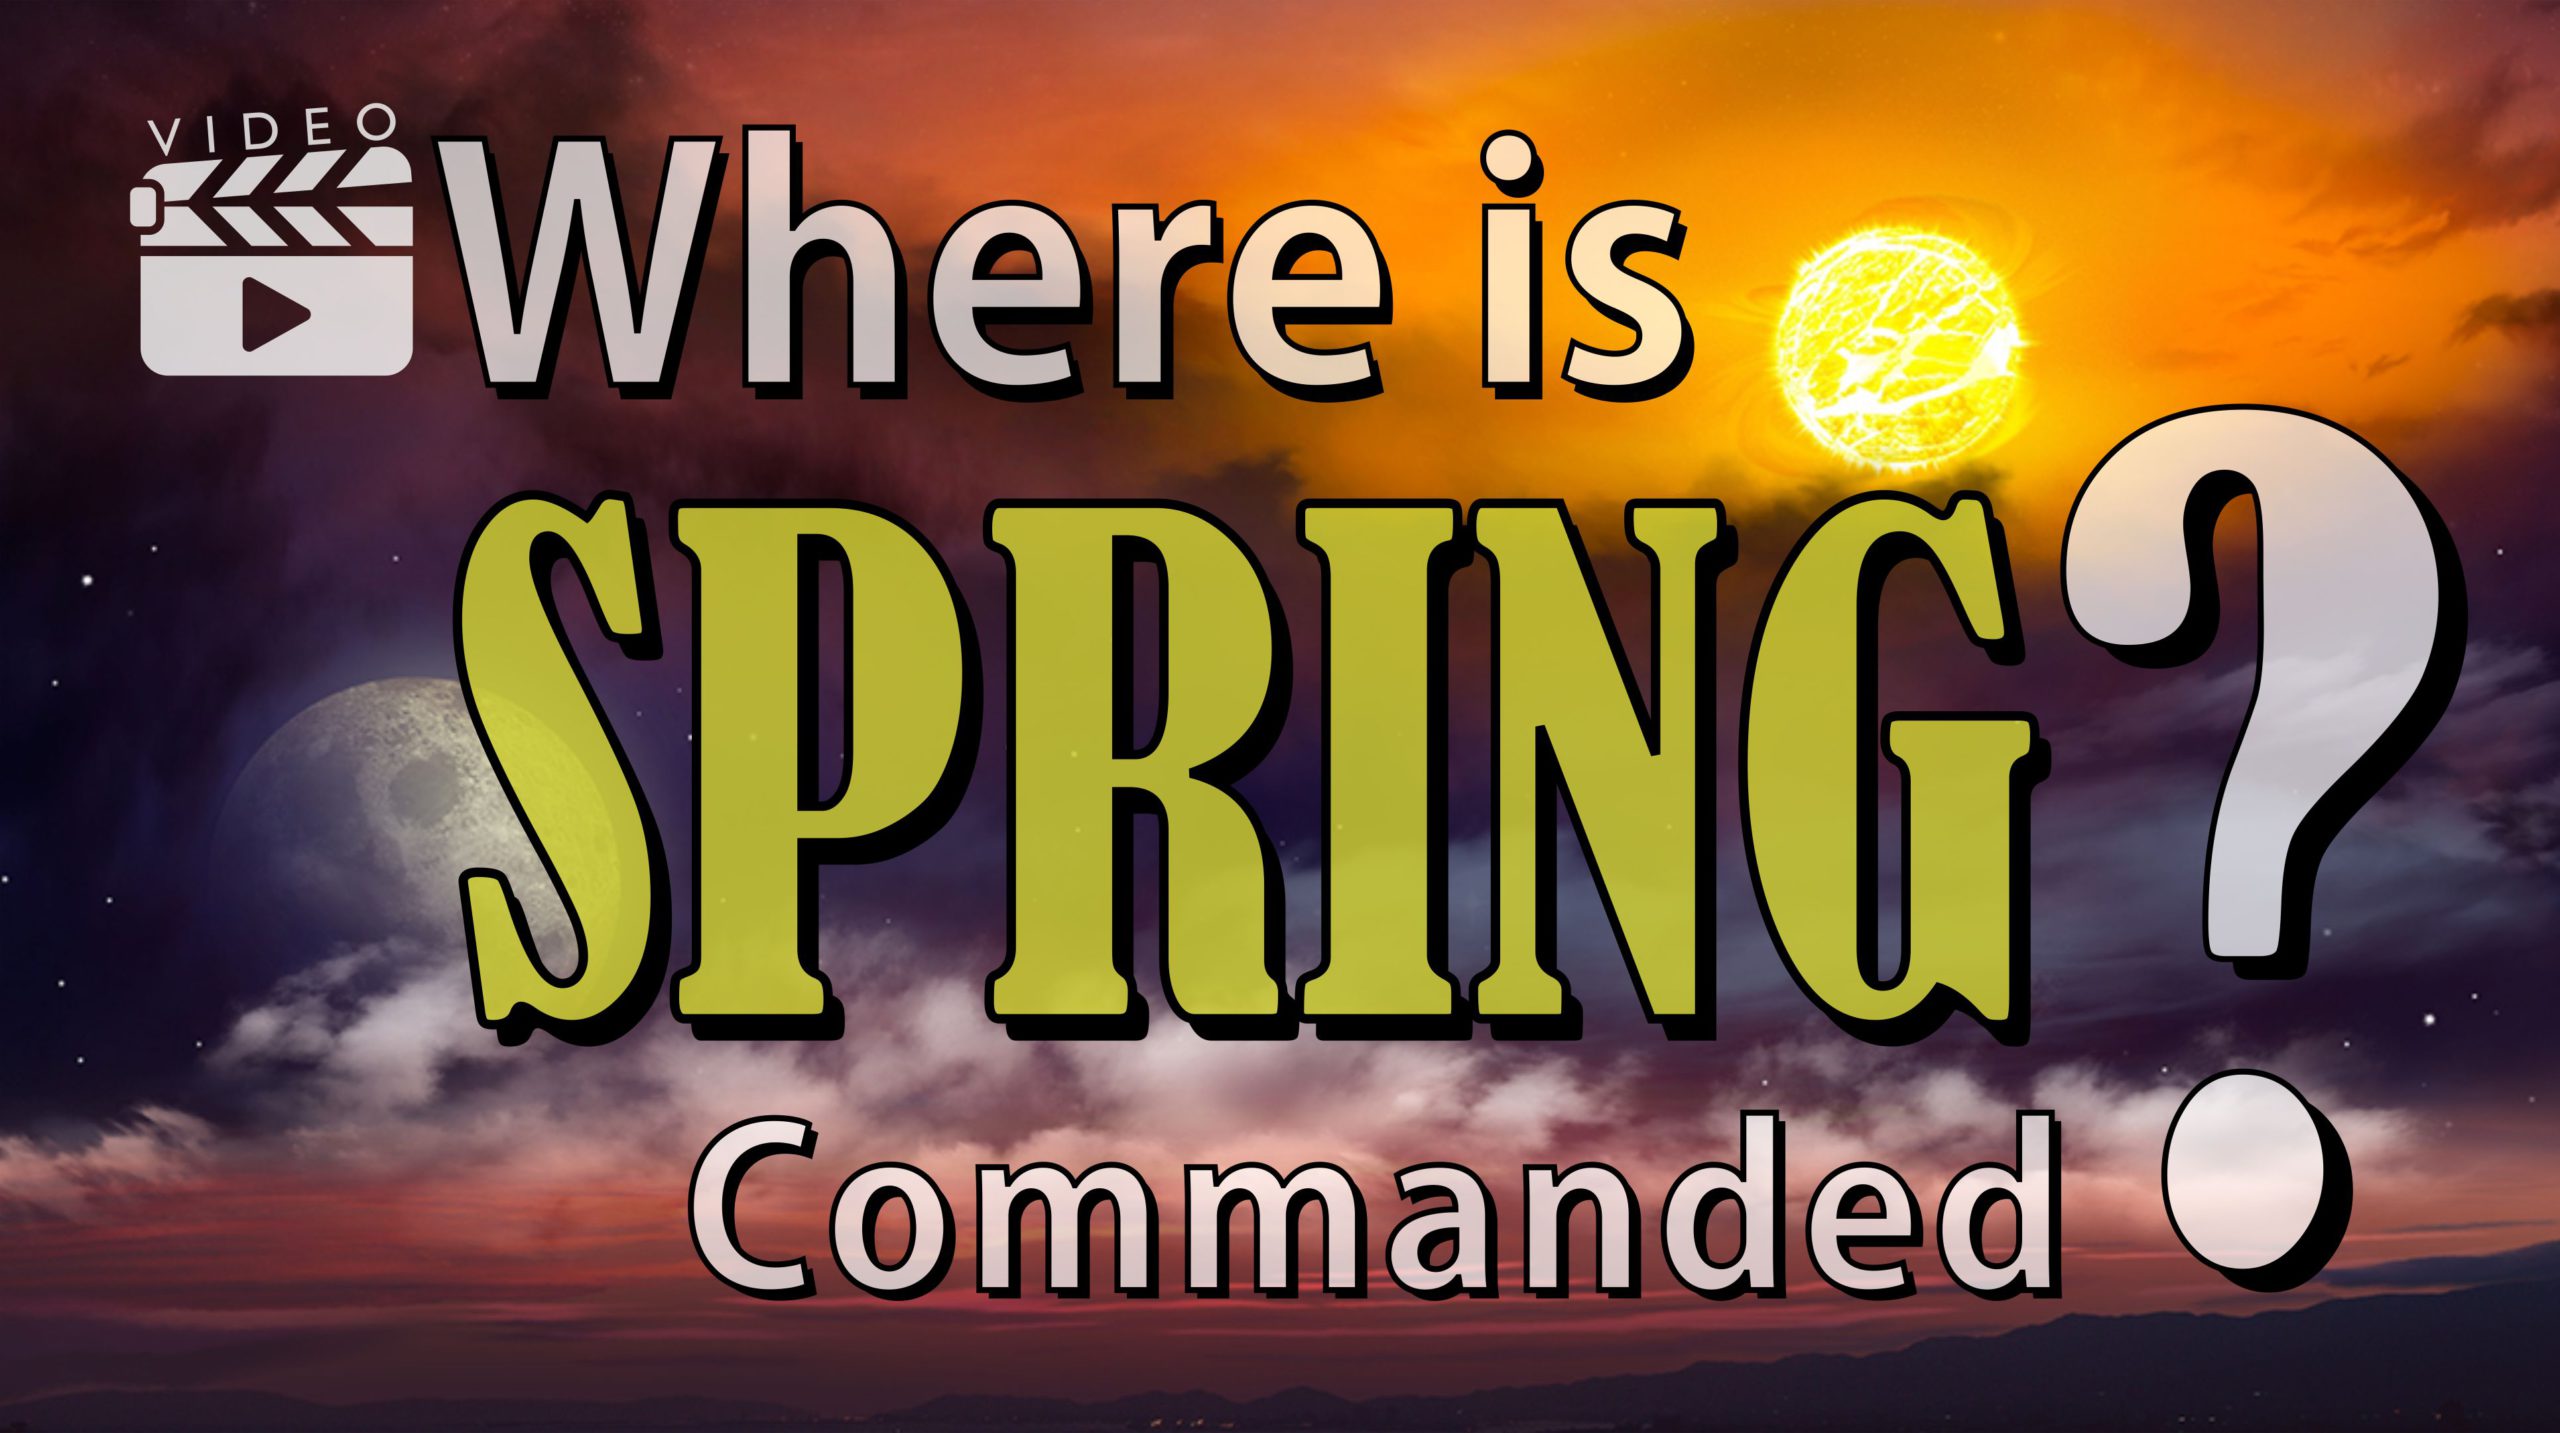 Where Is Spring Commanded?